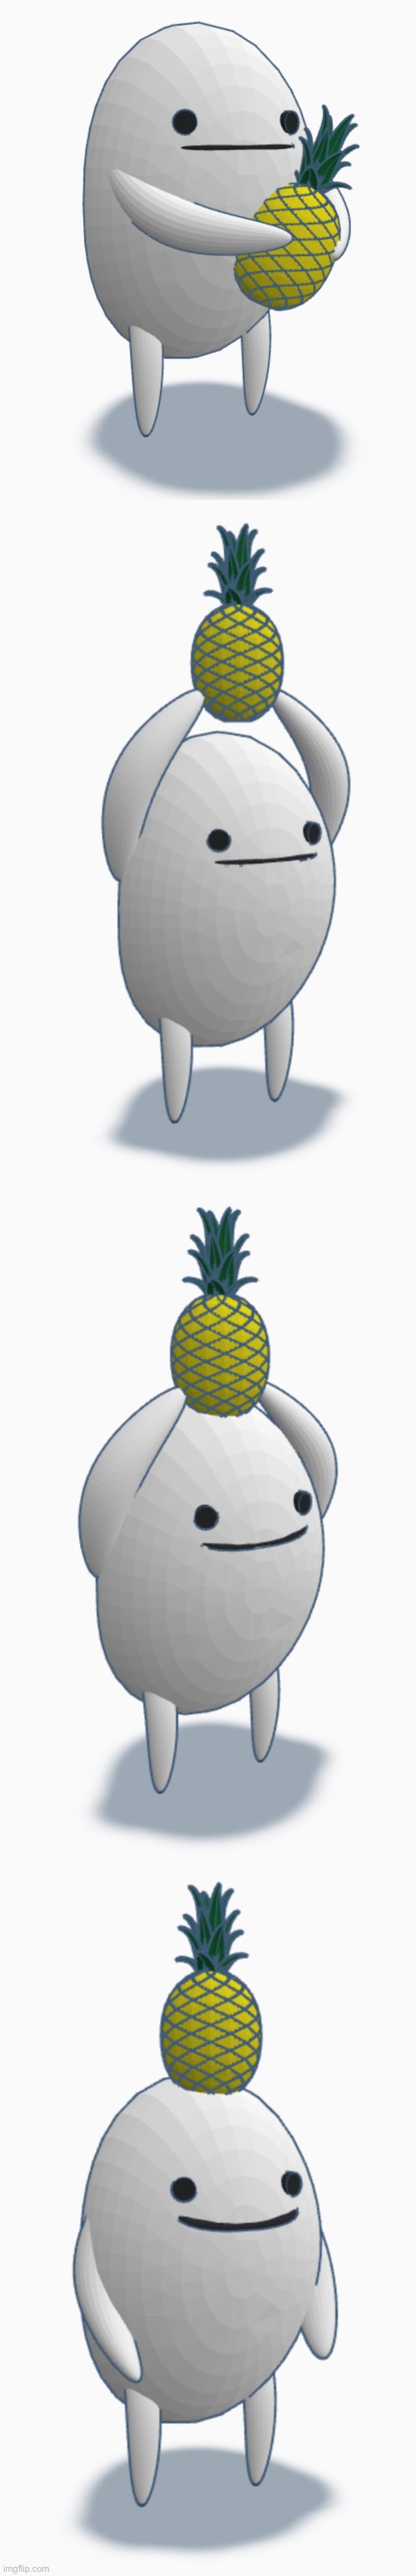 Pineapple :) | image tagged in drawings,3d model,derp dog,derp,bean dog,3d modeling | made w/ Imgflip meme maker